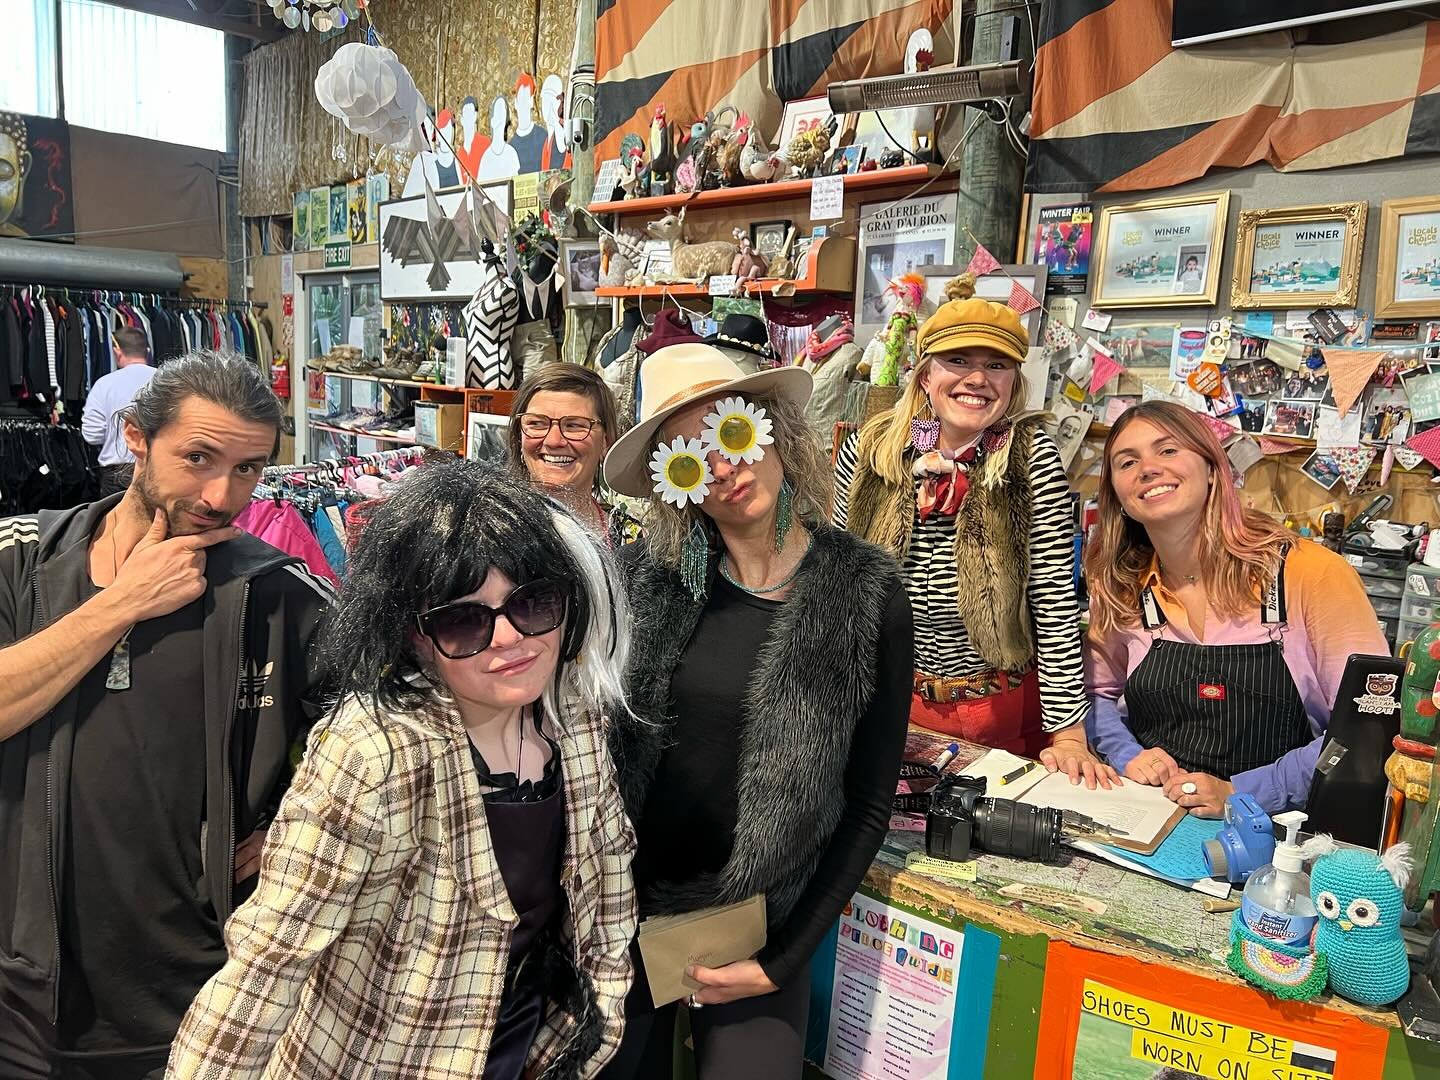 We had so much fun at Wasties last week! A Private Shopping experience, how cool 😎🛍️

Big shout out to Anna, Else and Jodie from Wastebusters who really made us feel like VIPs! 

And of course, THANK YOU @wanakawastebusters for having us and being 